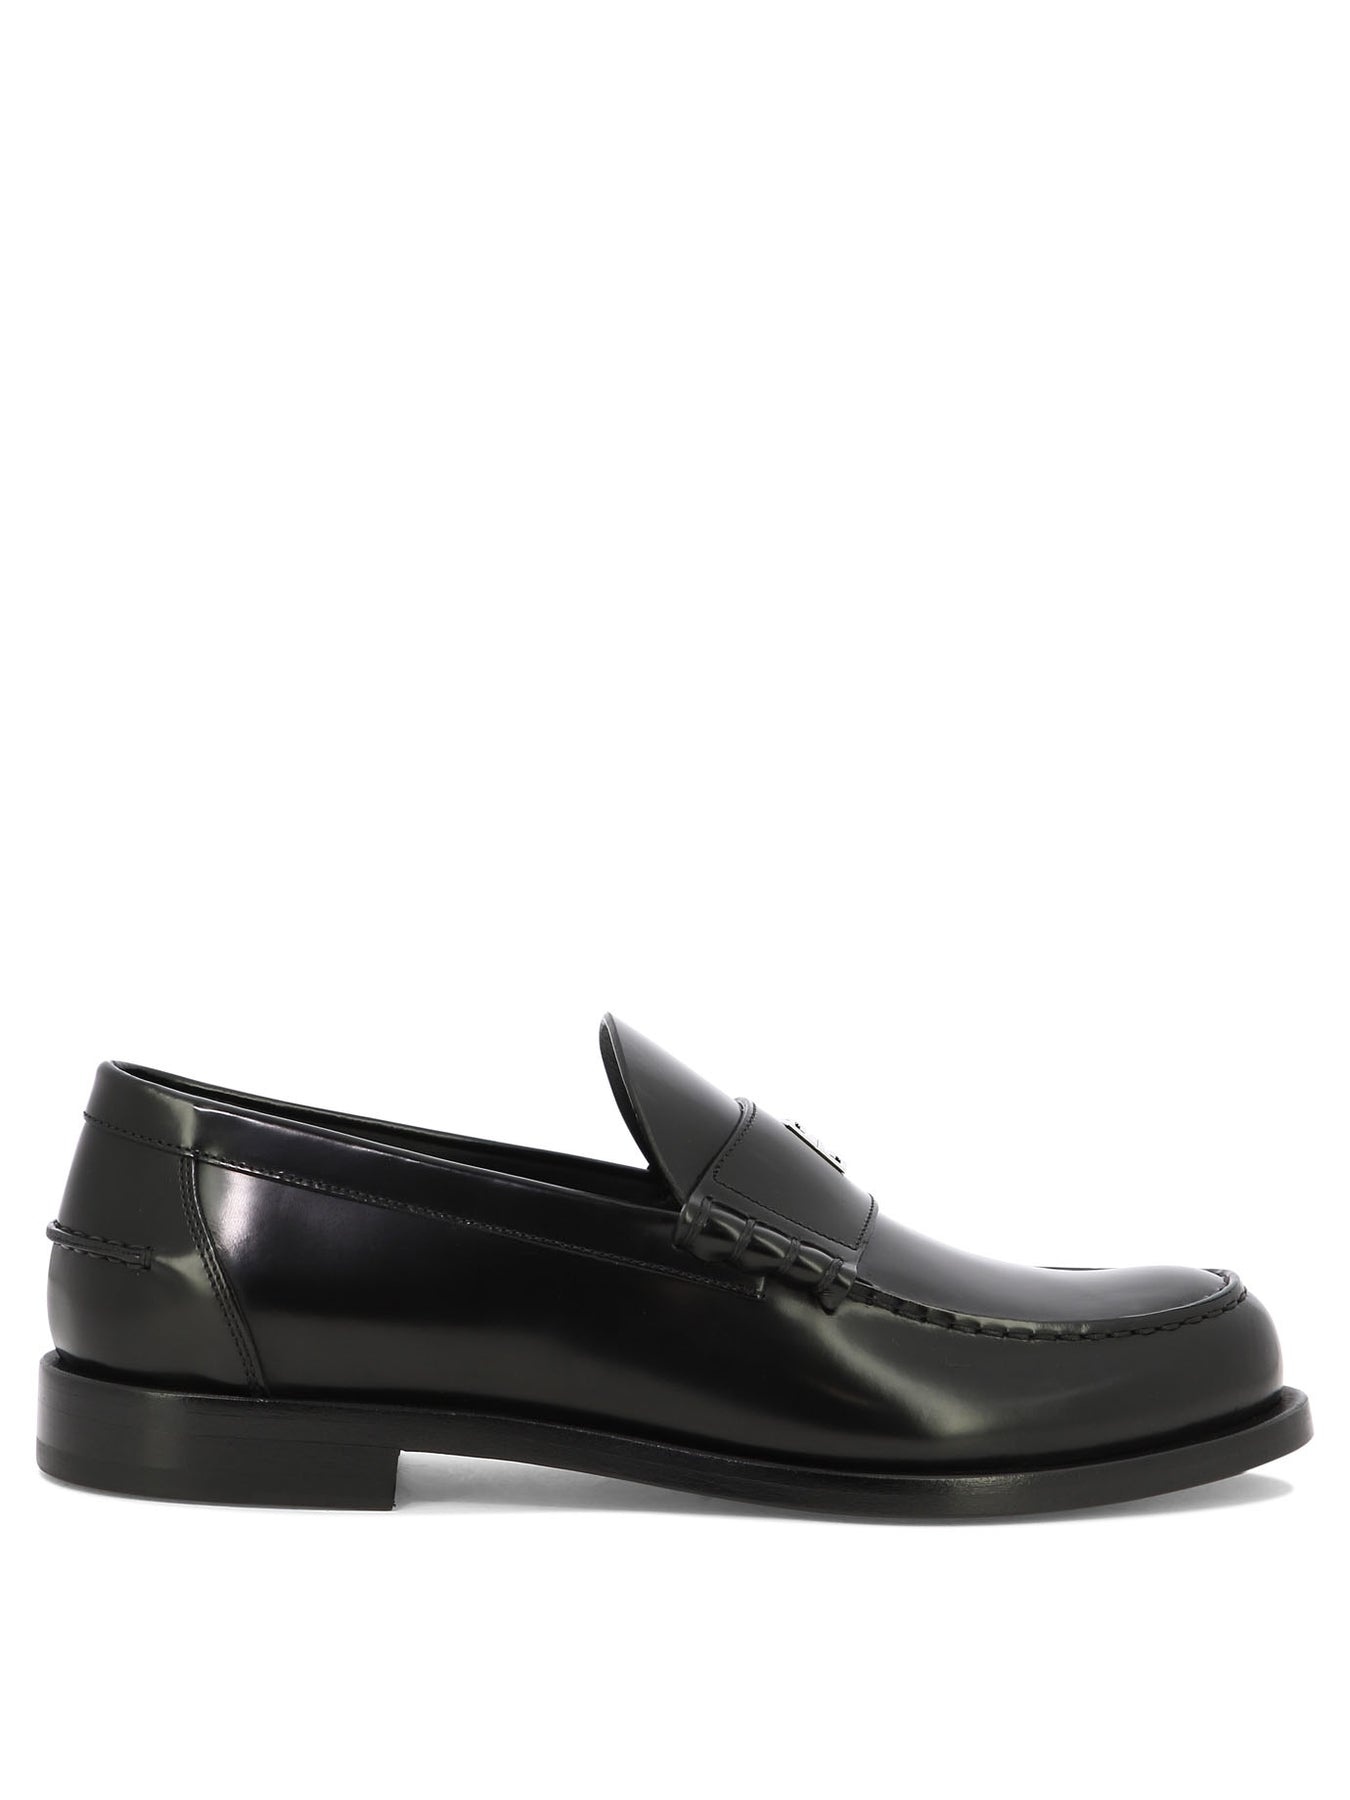 Mr G Loafers & Slippers Black - 1